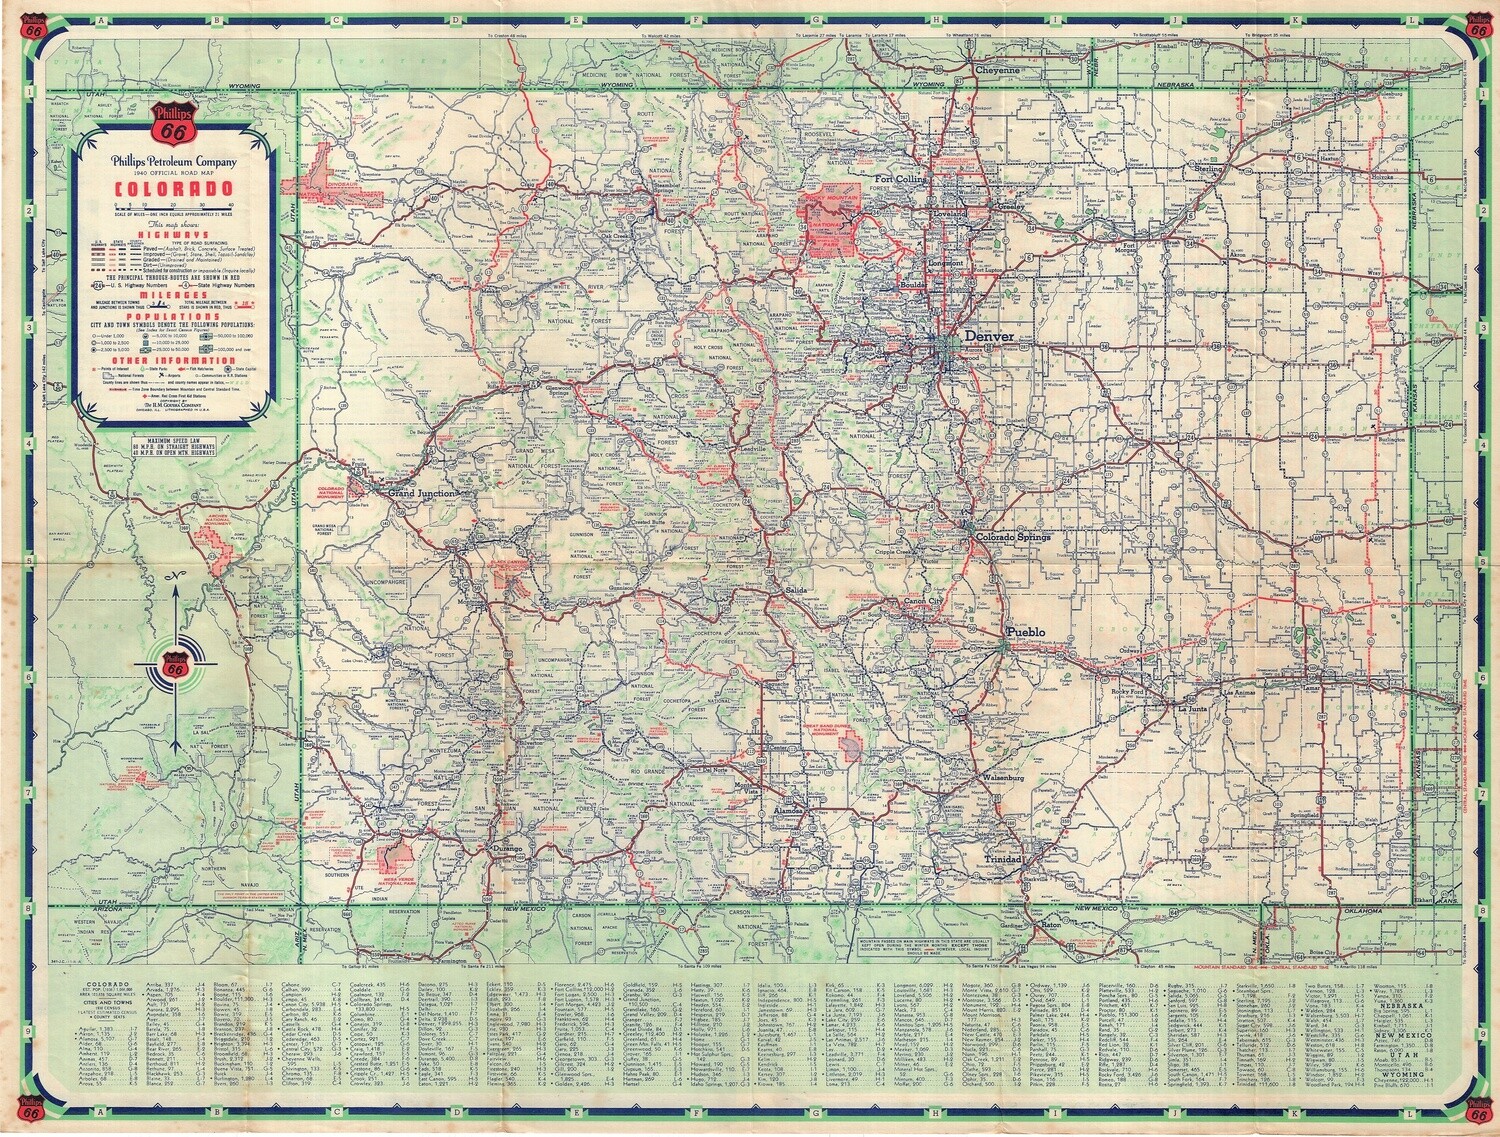 1940 Colorado Folding map by Gousha for Phillips 66